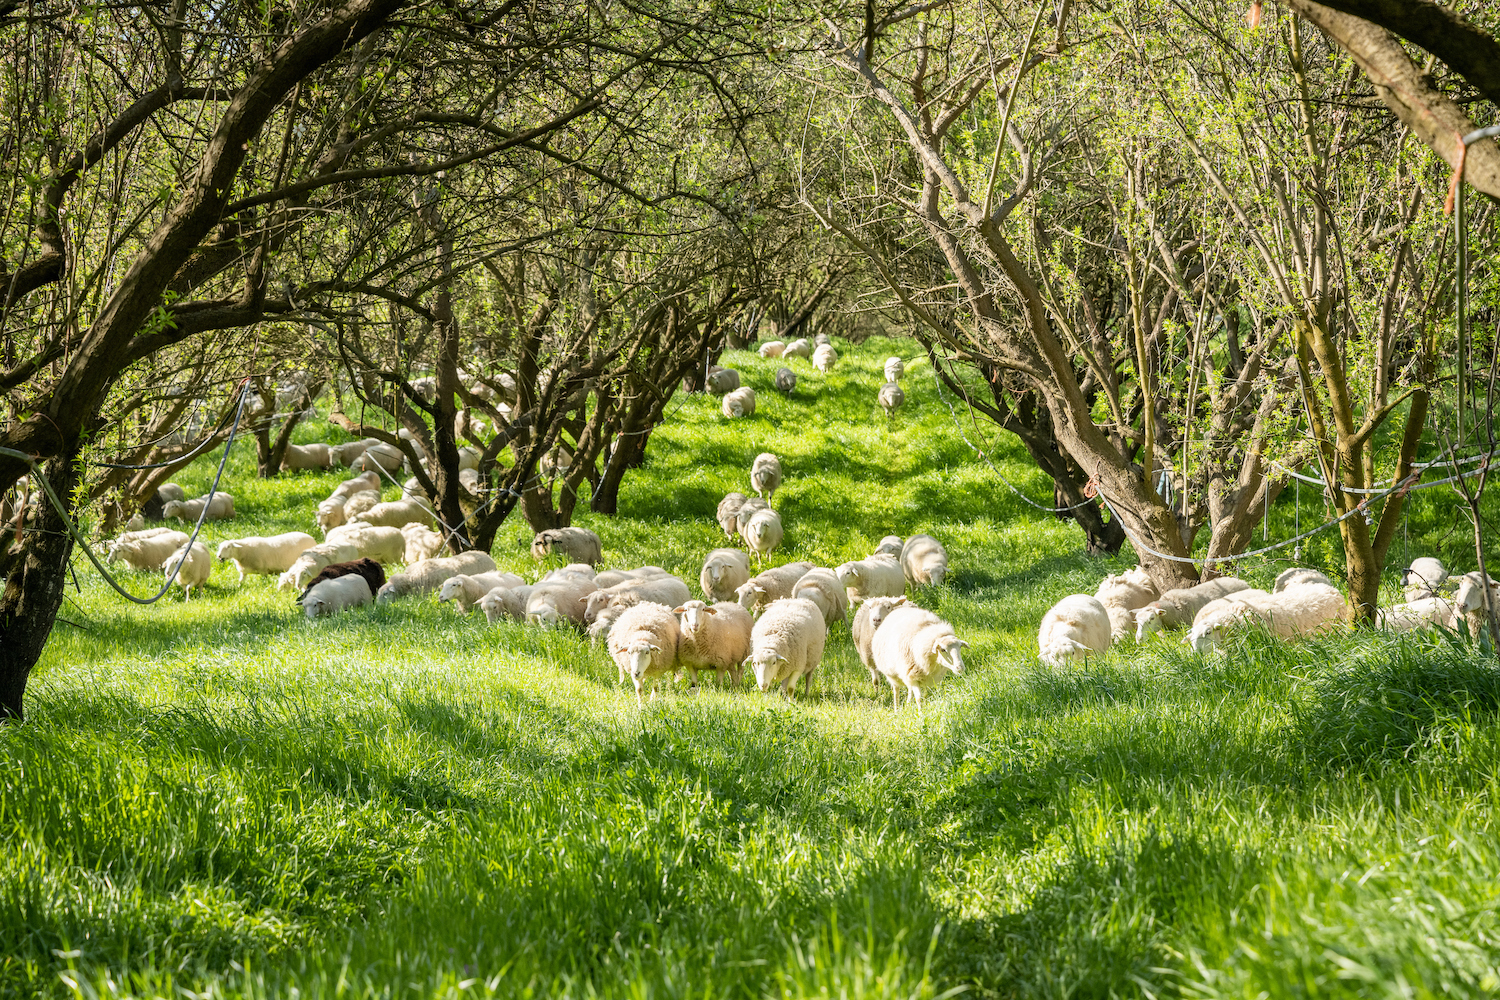 Sheep grazing between trees on a farm - regenerative agriculture